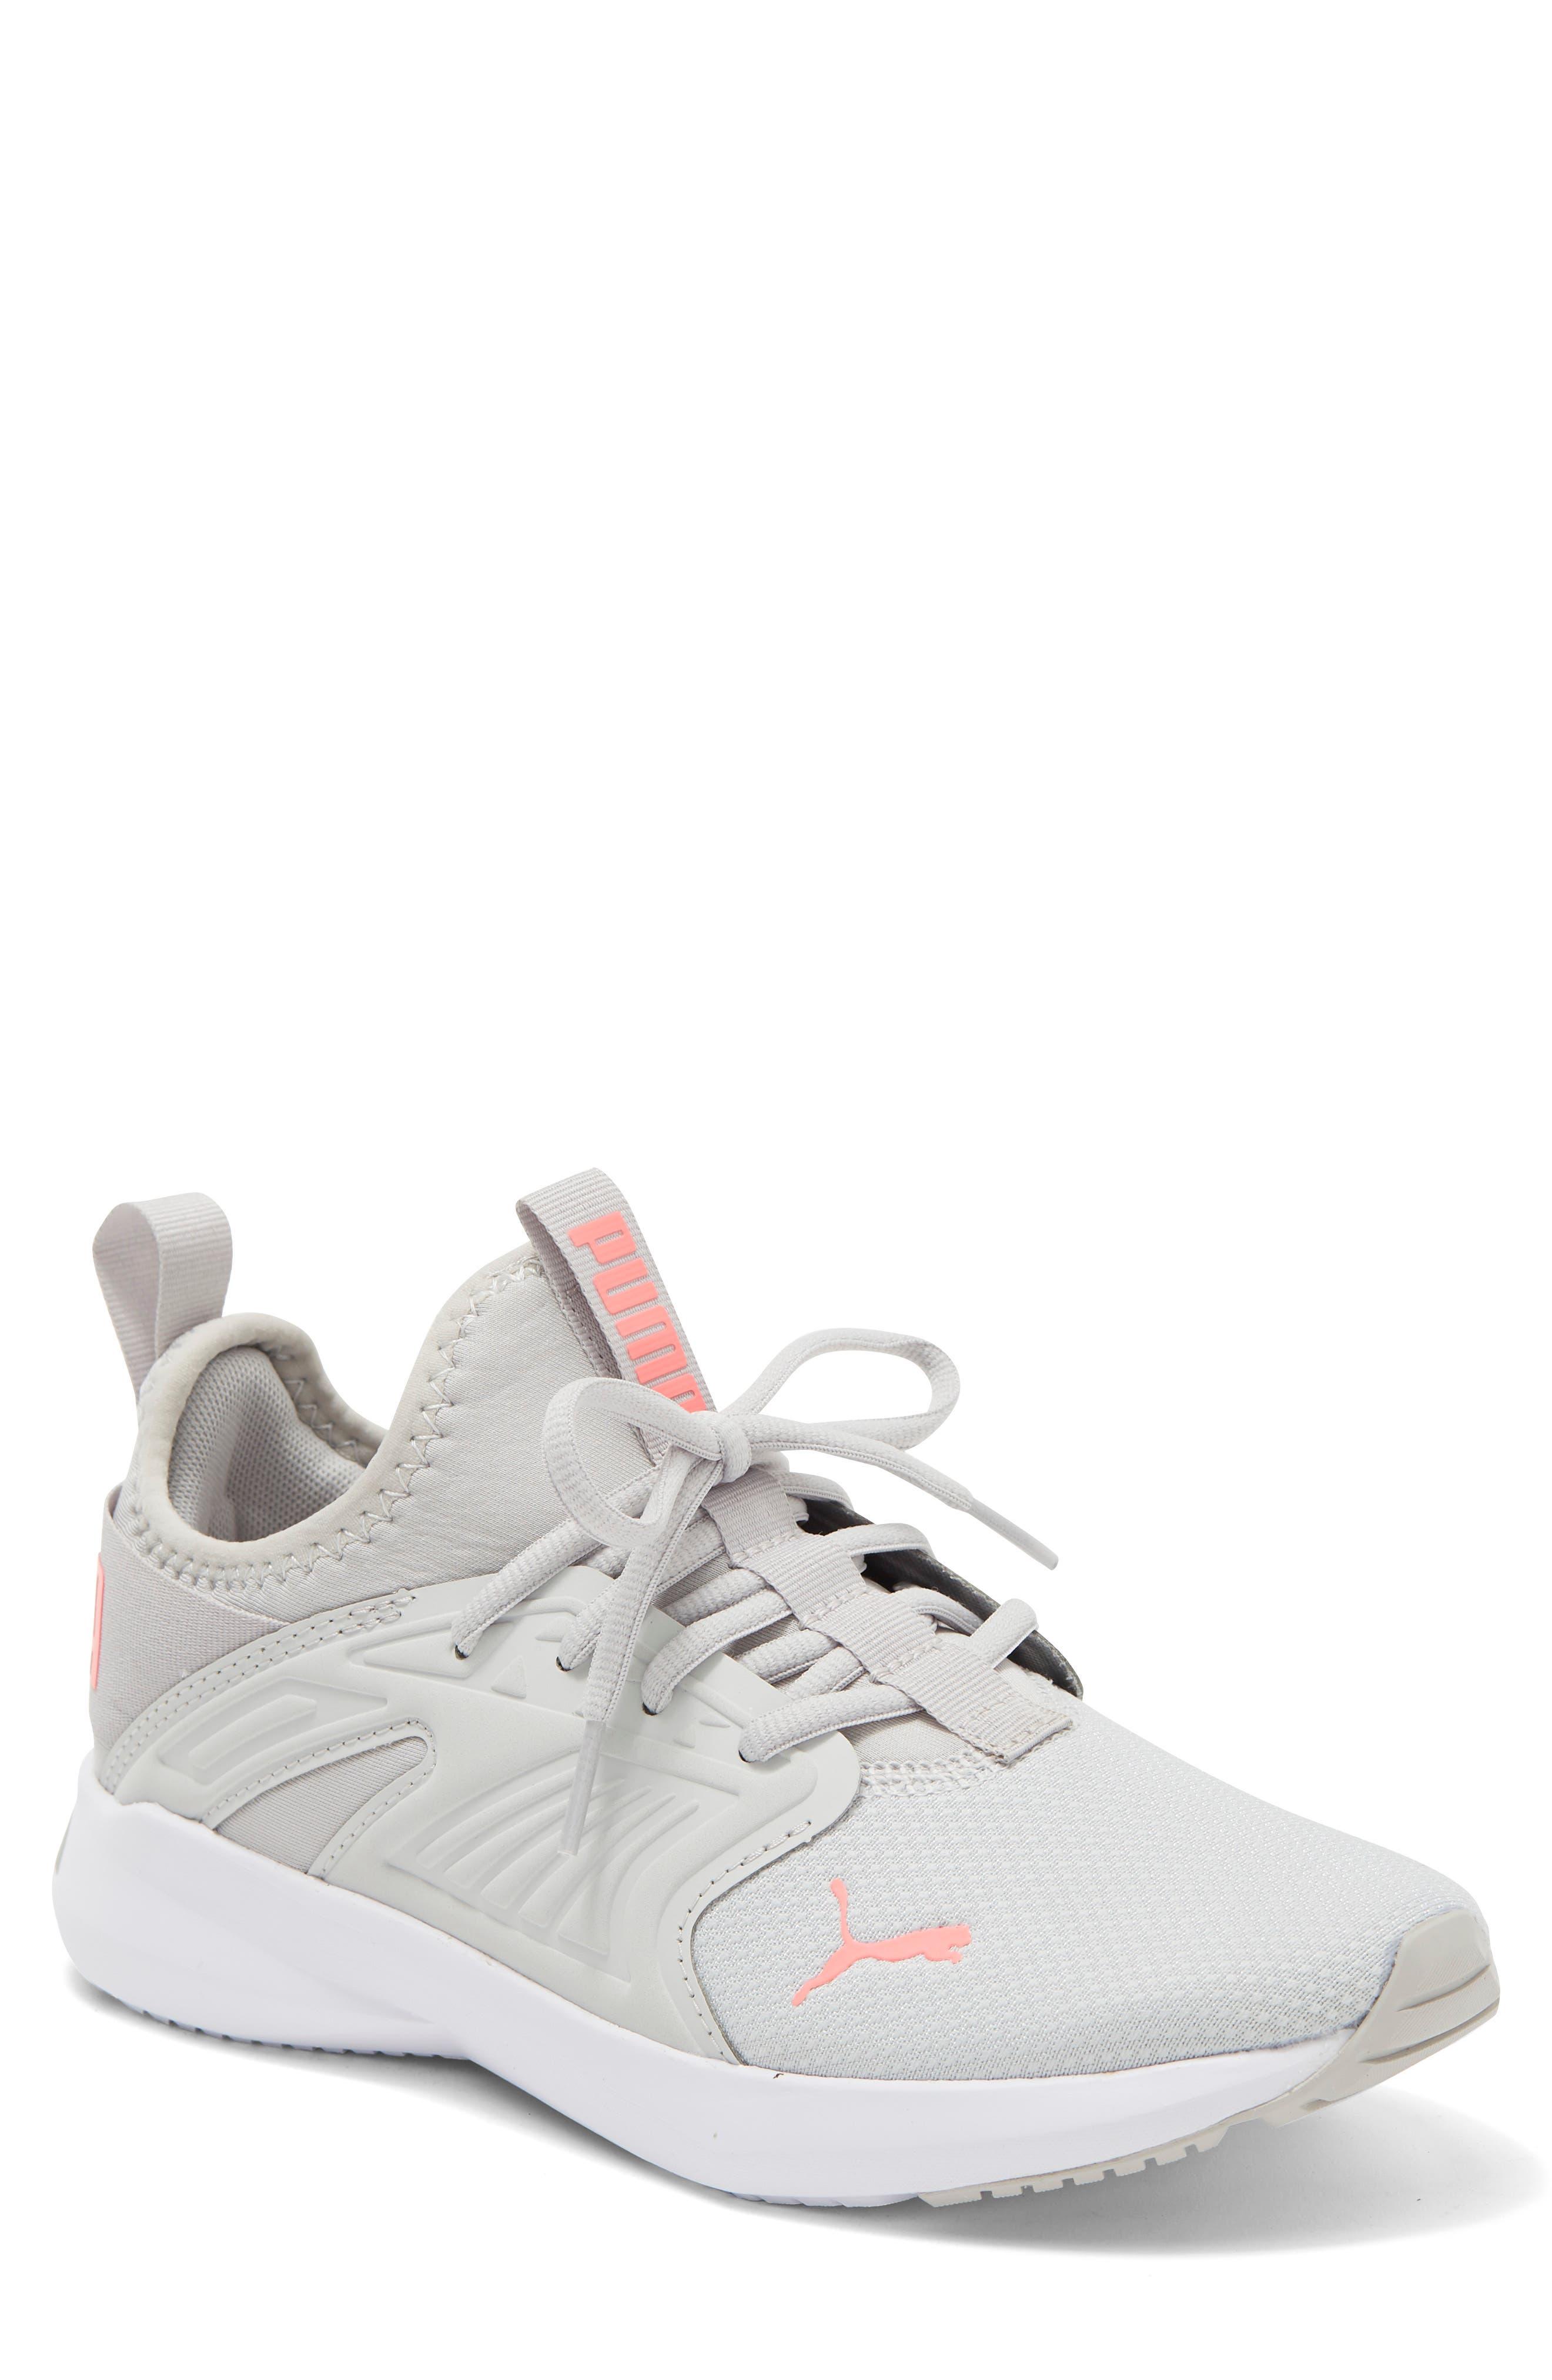 PUMA Softride Fly Sneaker In Gray Violet-sunset Glow At Nordstrom Rack in  White | Lyst